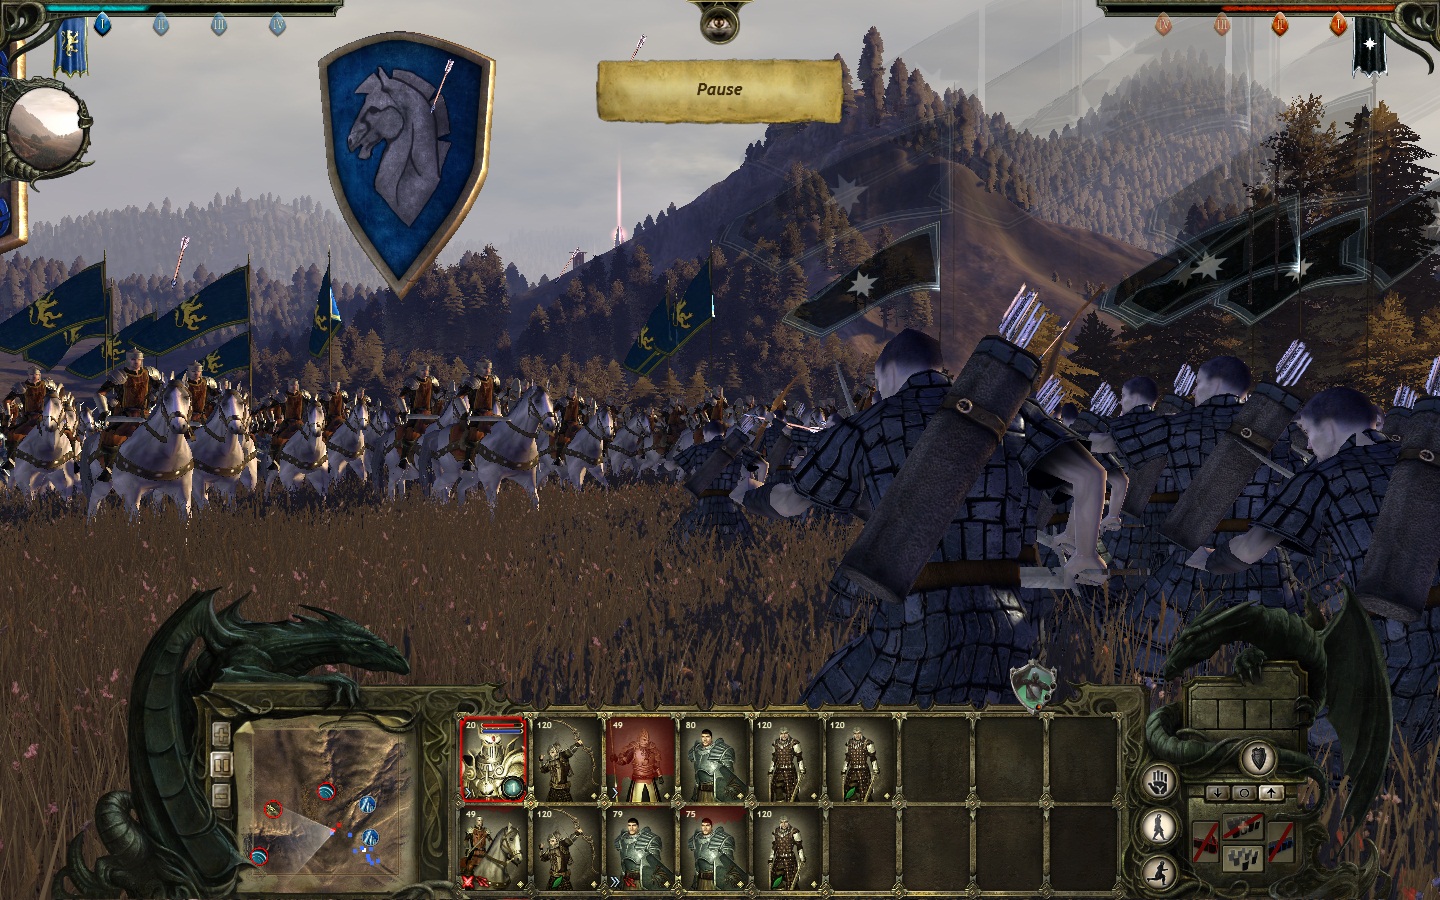 King arthur 2. King Arthur: the role-playing Wargame. King Arthur role playing Wargame Ланселот. Medieval RPG games.